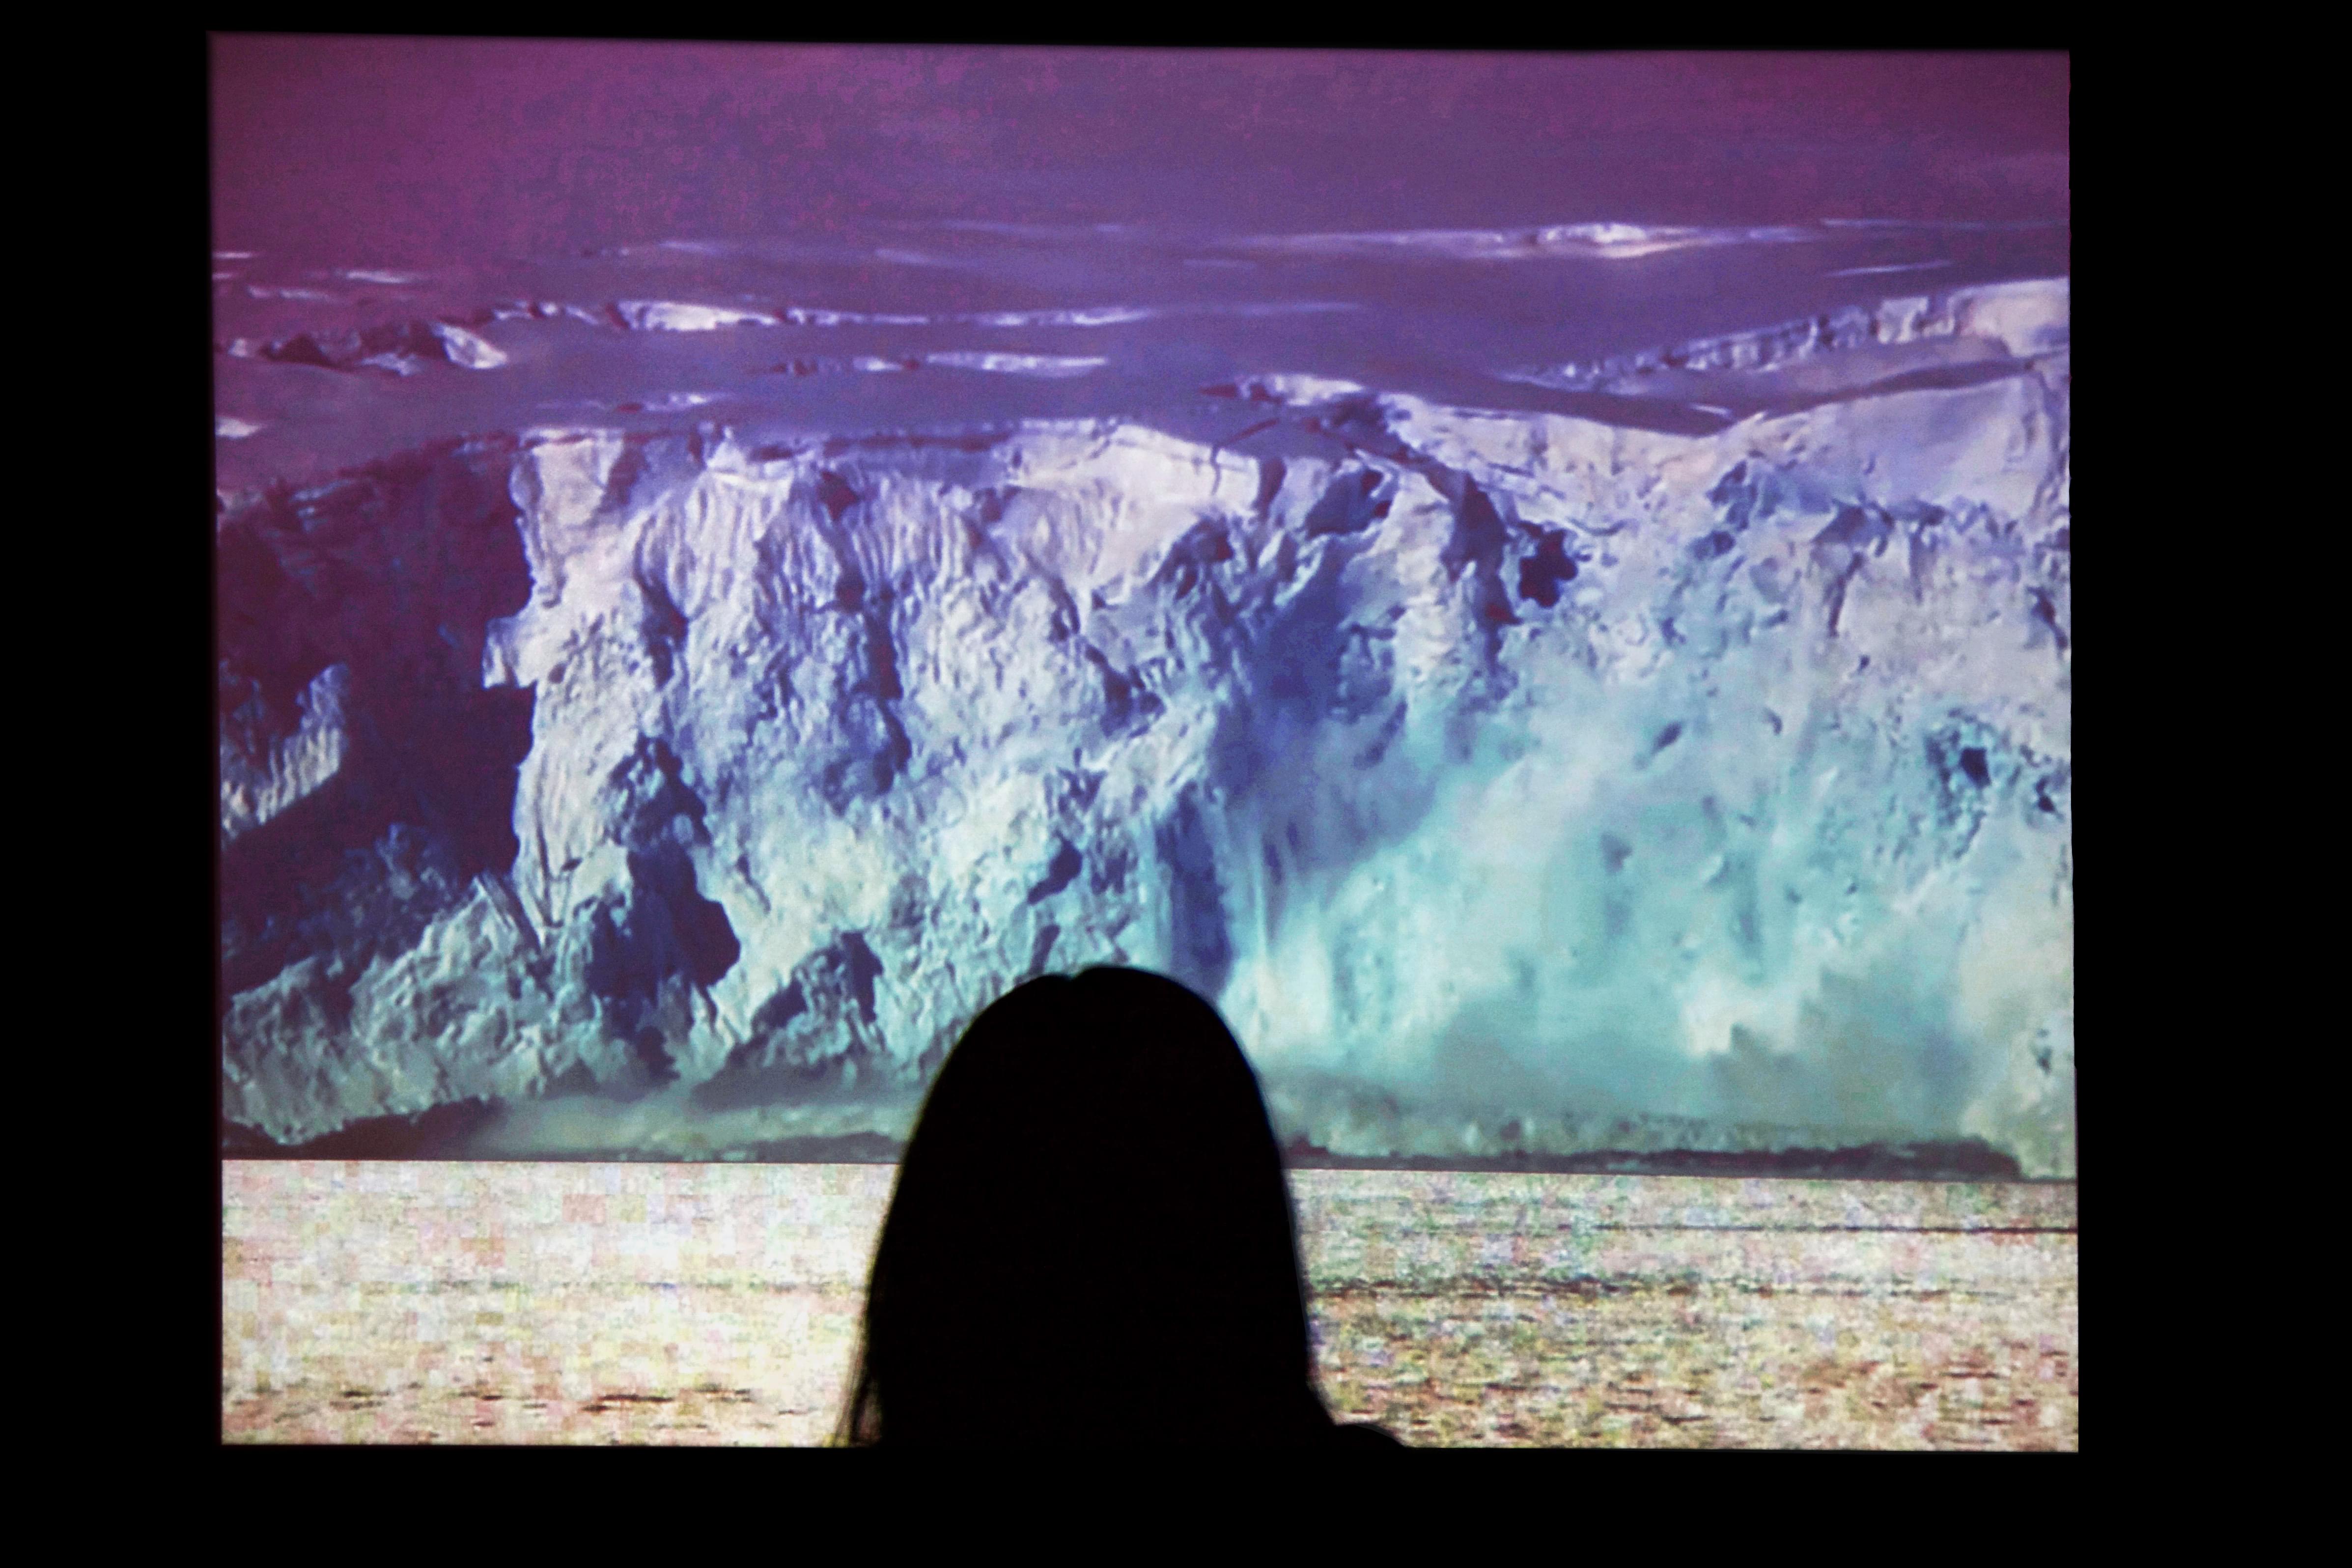 Close-up photograph of the back of a gallery-goer's head as they look at a projected image of a large glacier calving in front of them